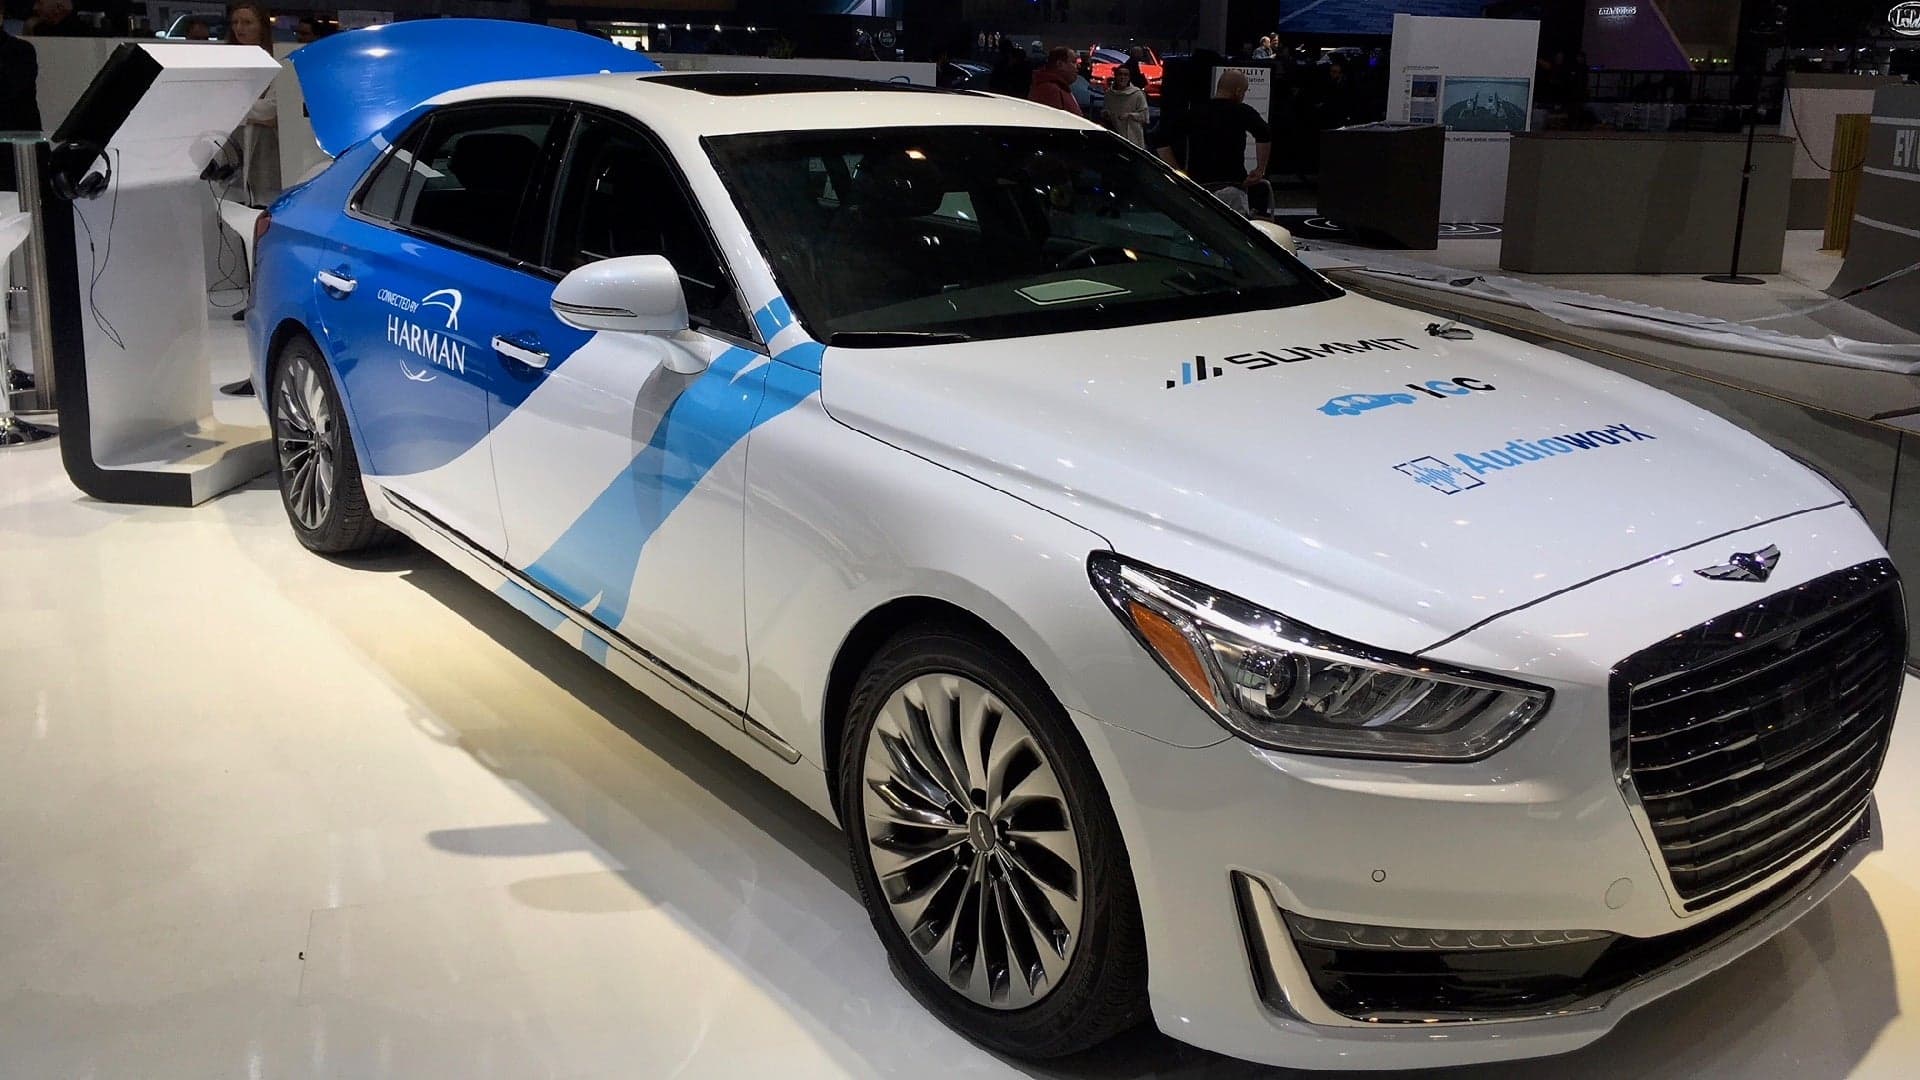 J.D. Power and Harman Team up to Share Driver Data With Automakers